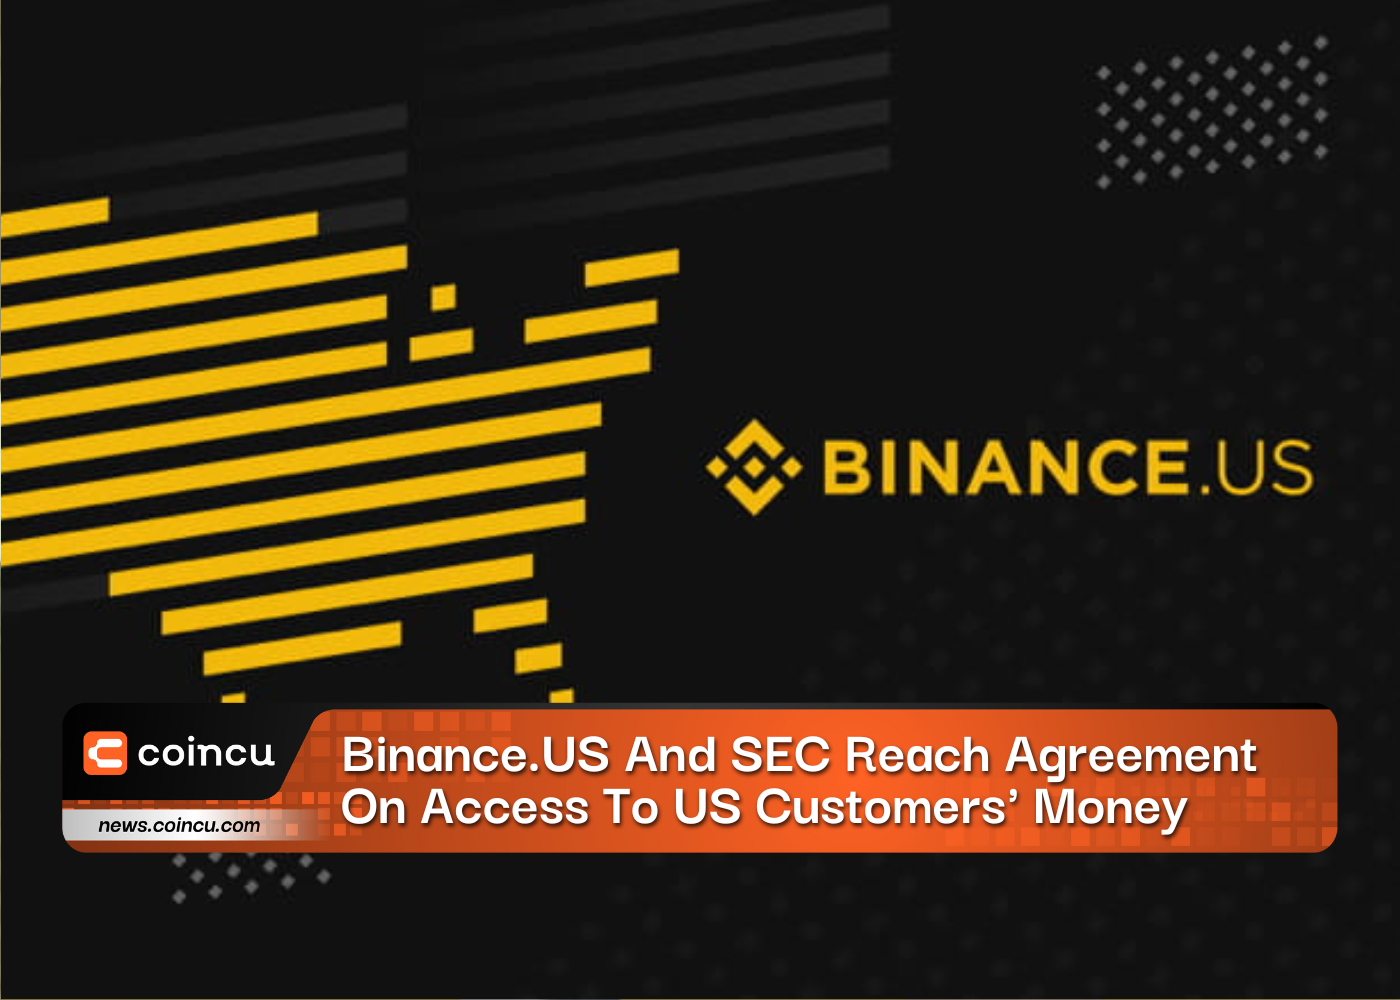 Binance.US And SEC Reach Agreement On Access To US Customers' Money